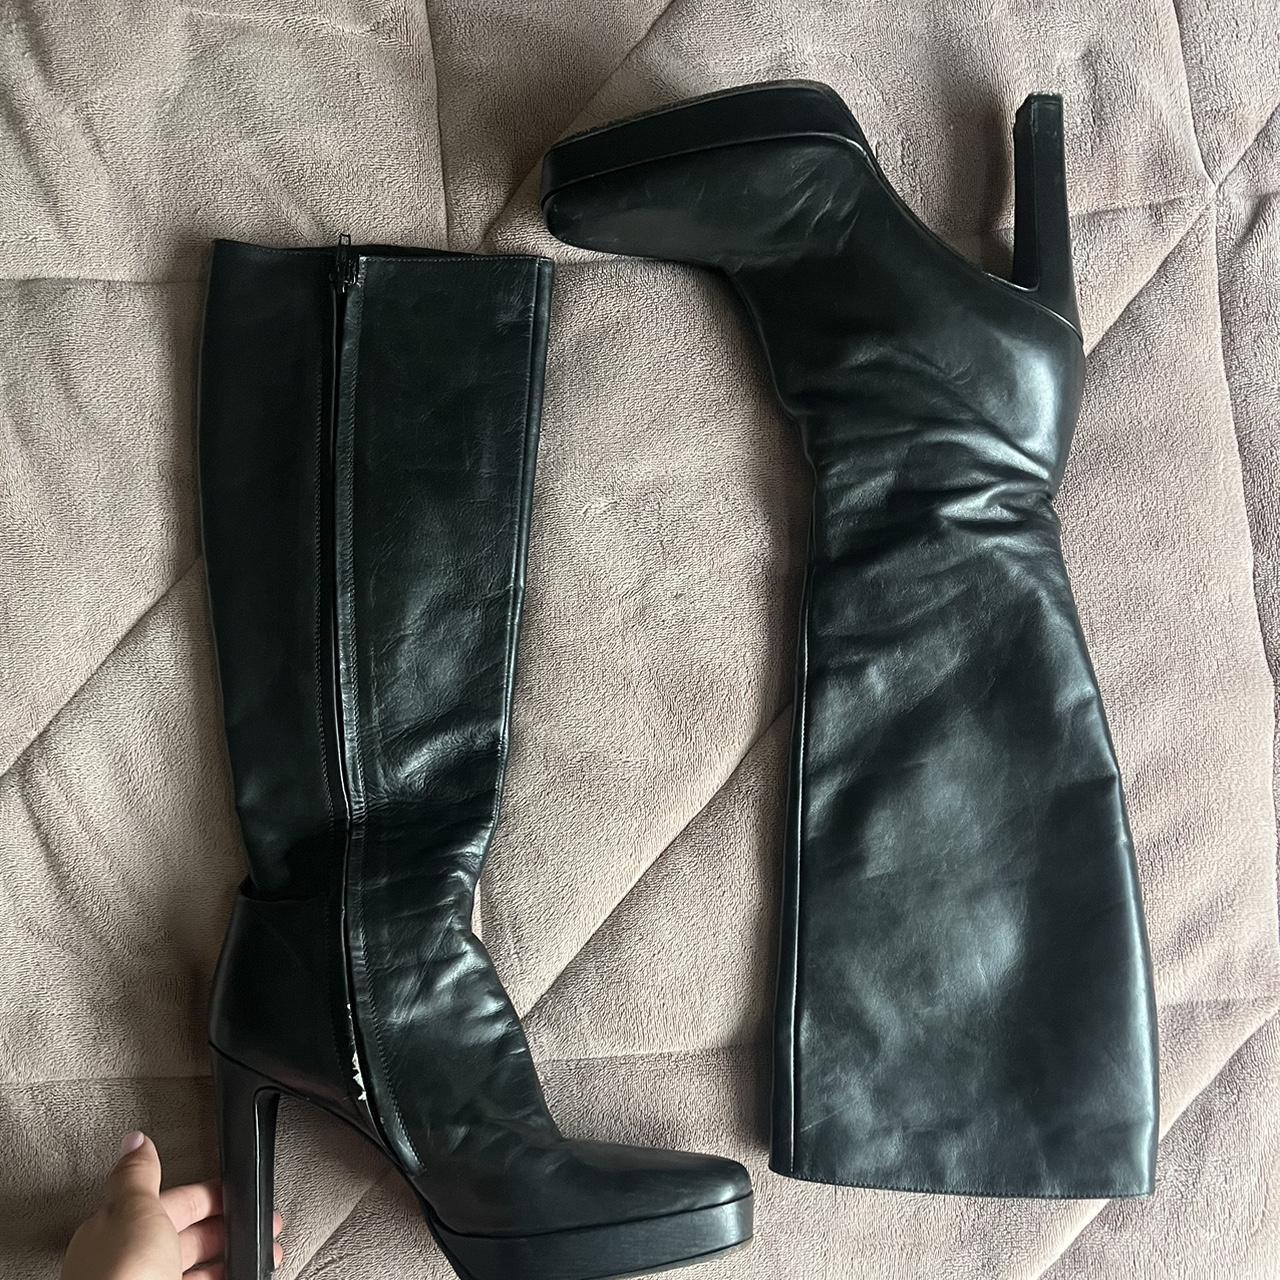 Gucci Rainboots Good conditions, some flaws see - Depop